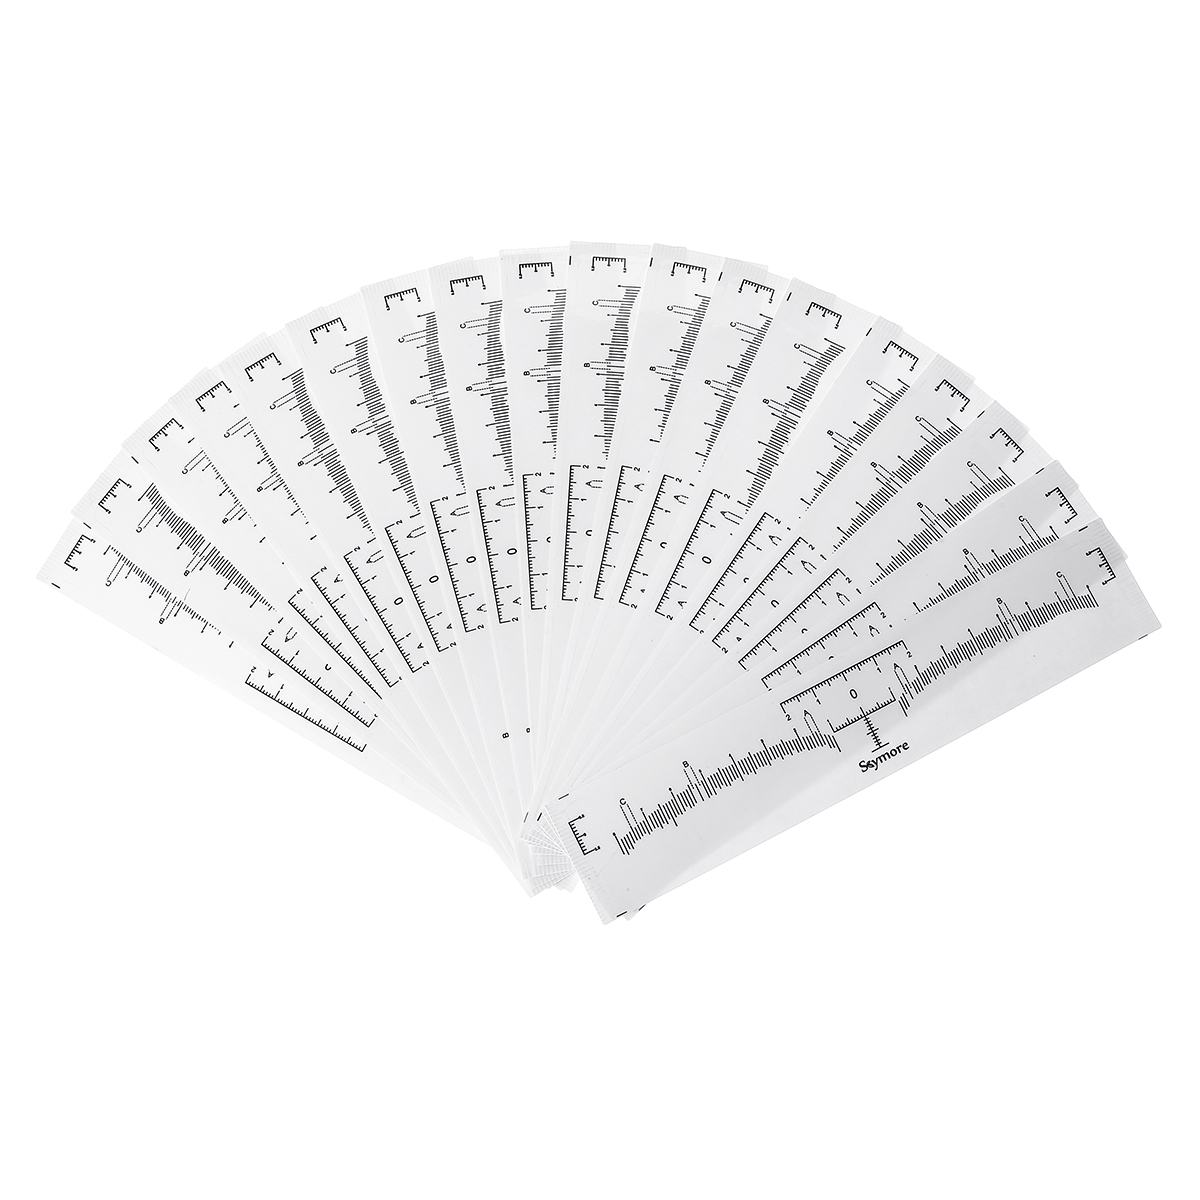 100PCS-Eyebrow-Stencil-One-time-Eyebrow-Grooming-Stencil-Measure-Ruler-Brow-Shaper-Makeup-Shaping-To-1940017-11